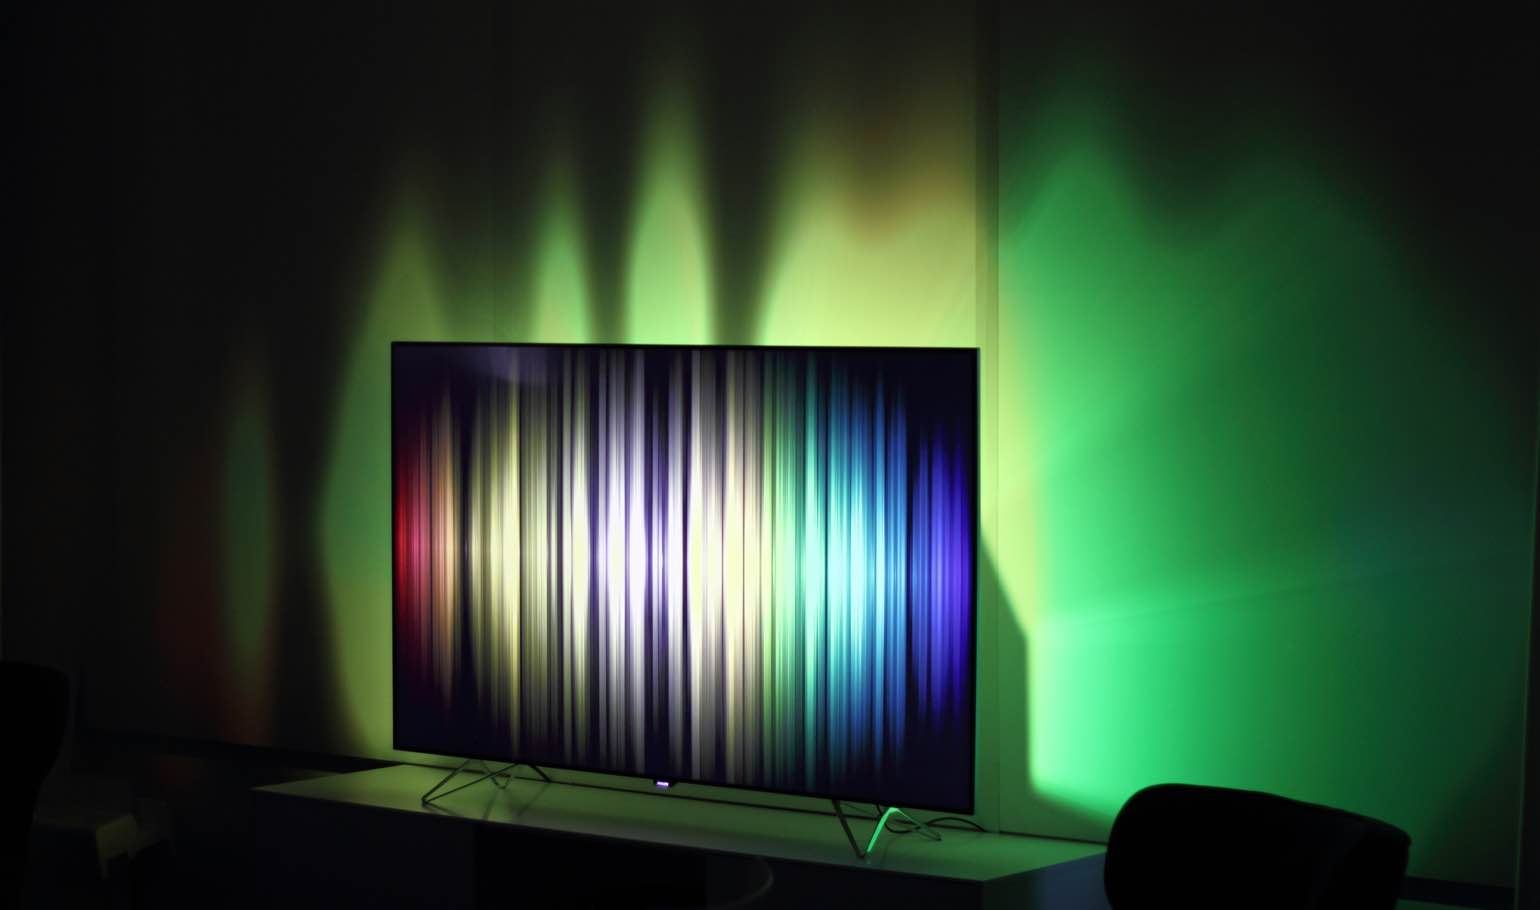 Ambilight Vs Ambilux TVs from Philips